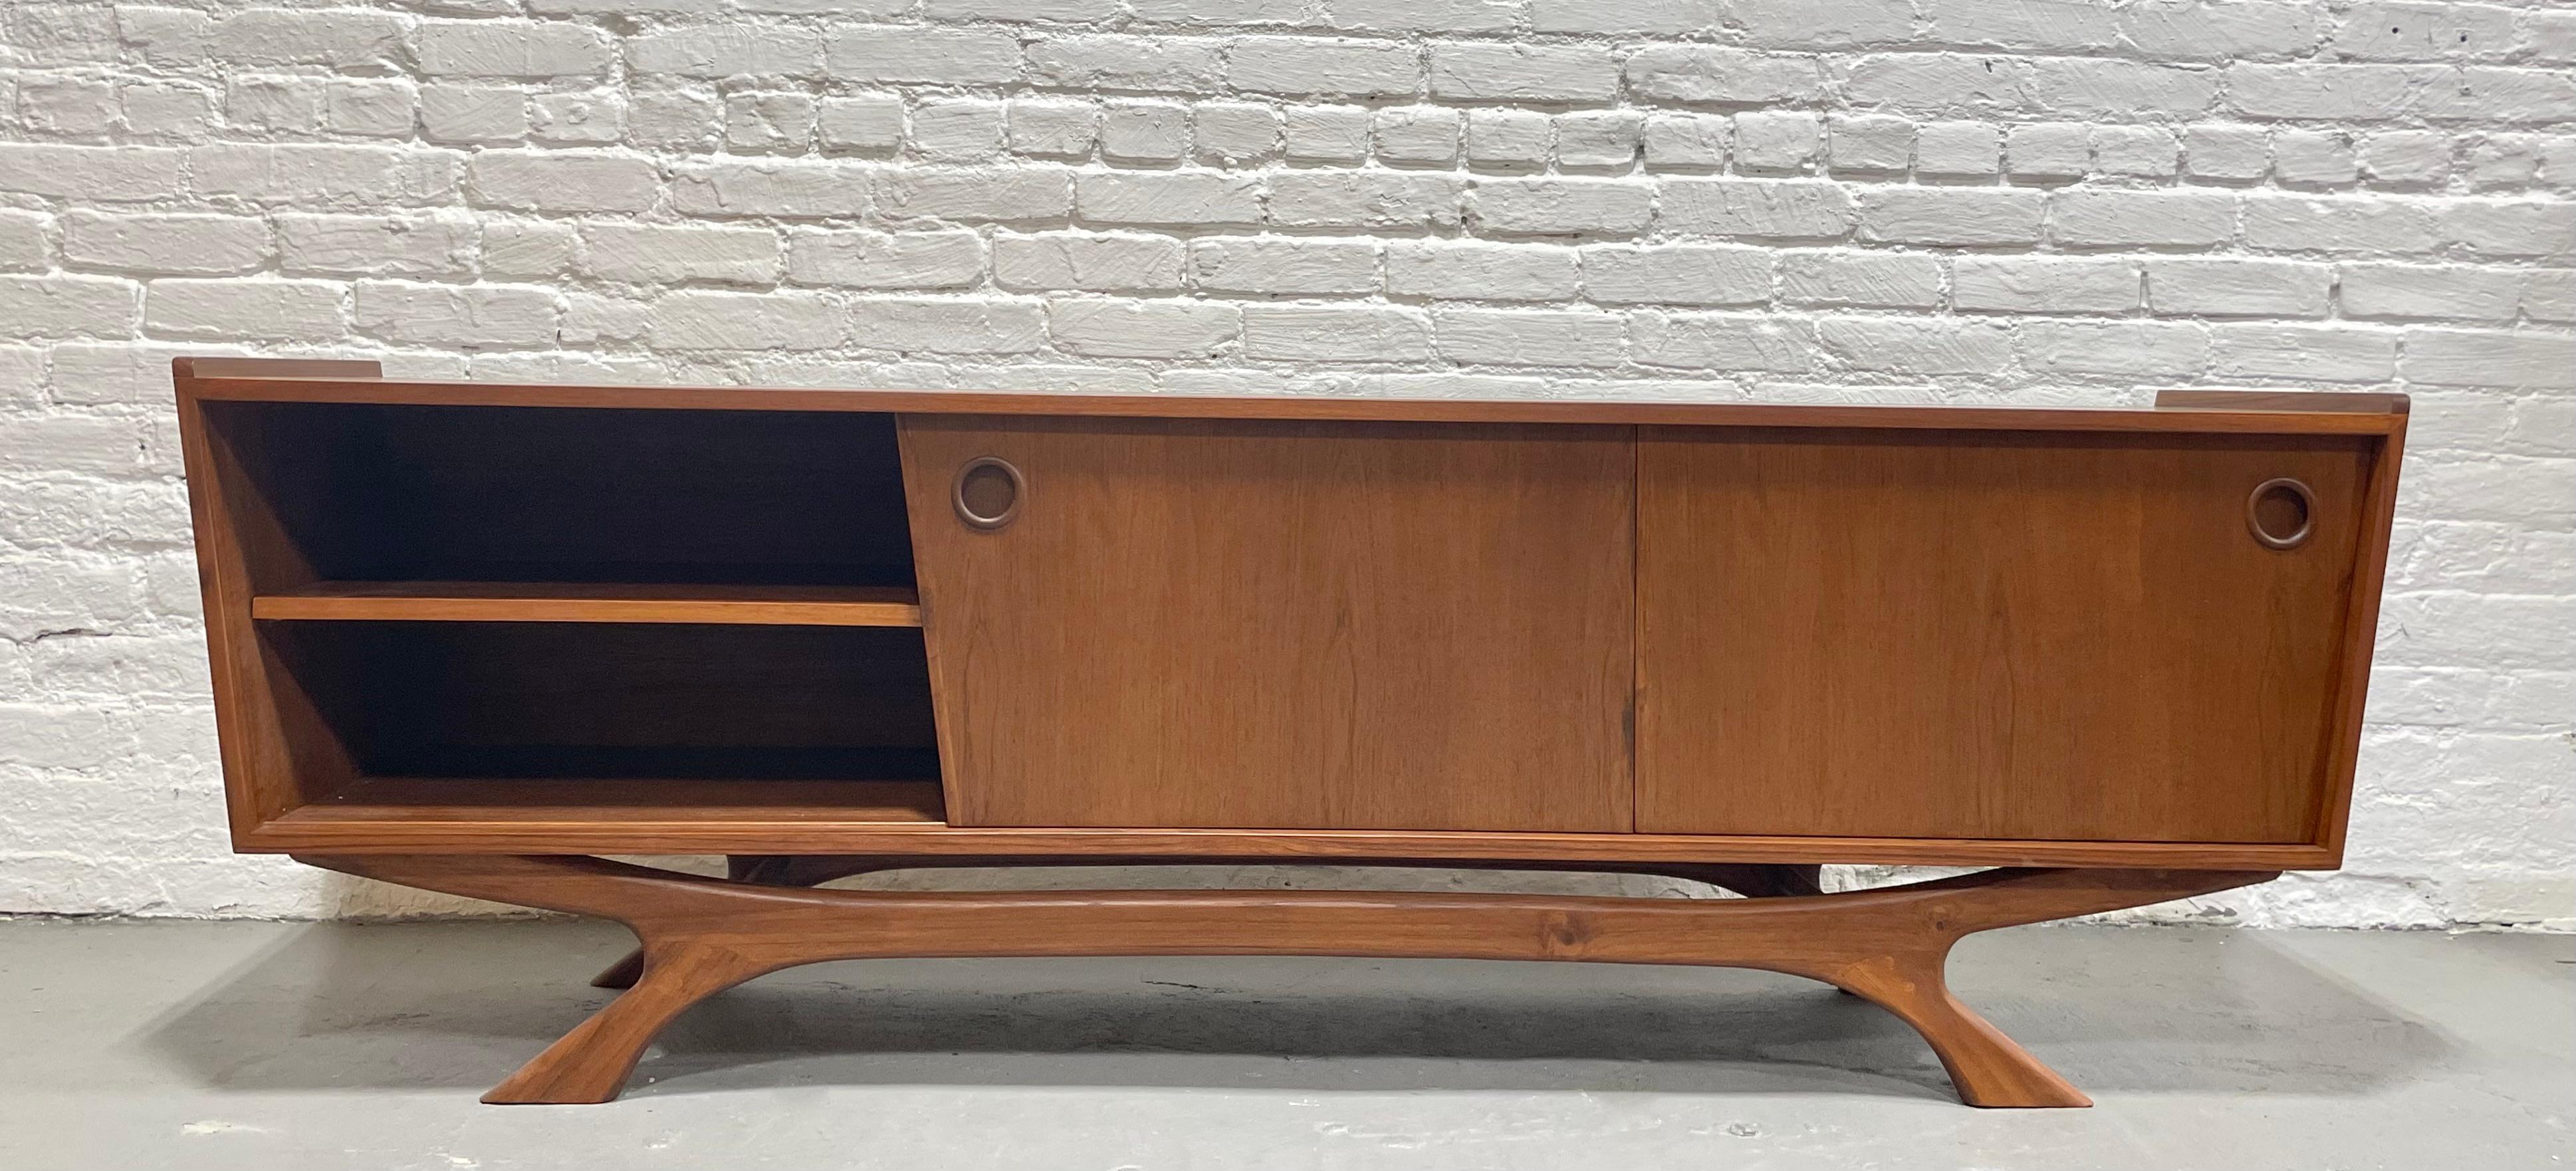 Wood Long + Low Mid-Century Modern Styled Teak Credenza Media Stand